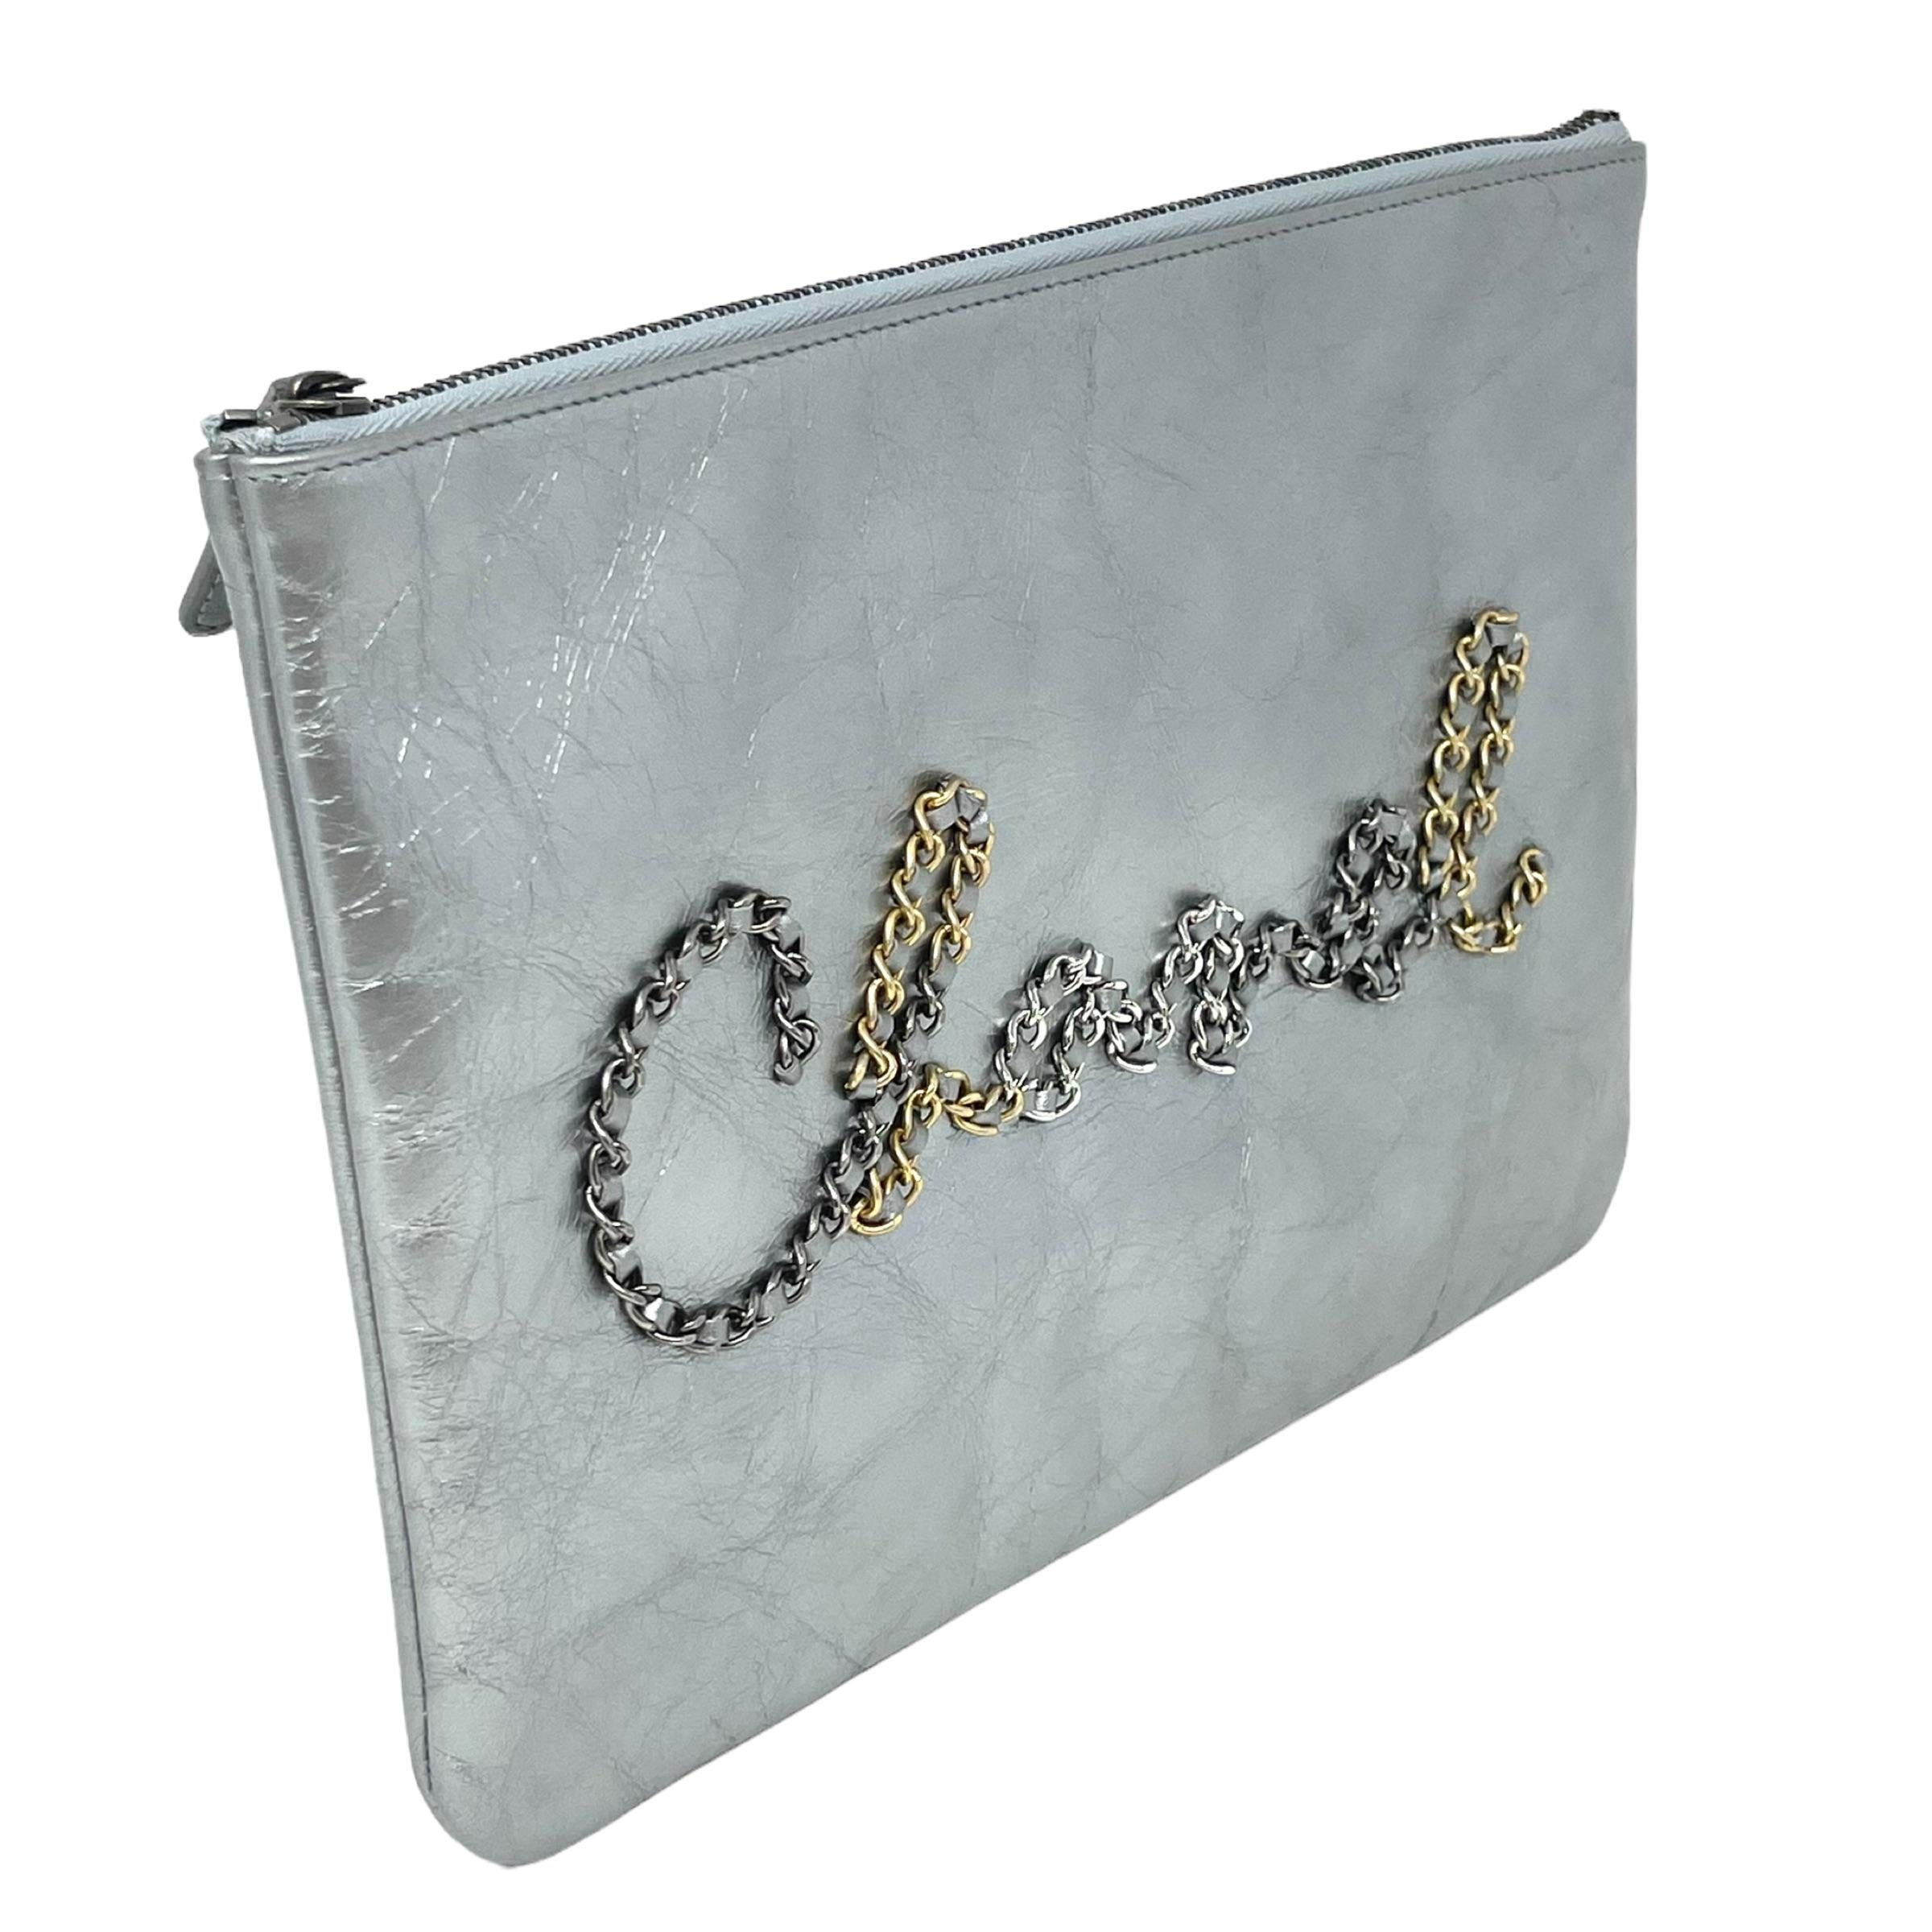 New Chanel Silver Chain Logo Leather Clutch Bag

Authenticity Guaranteed

DETAILS
Brand: Chanel
Gender: Women
Category: Clutch
Condition: Brand new
Color: Silver
Material: Leather
Front chain logo
Silver-tone hardware
Top zip closure
1 main